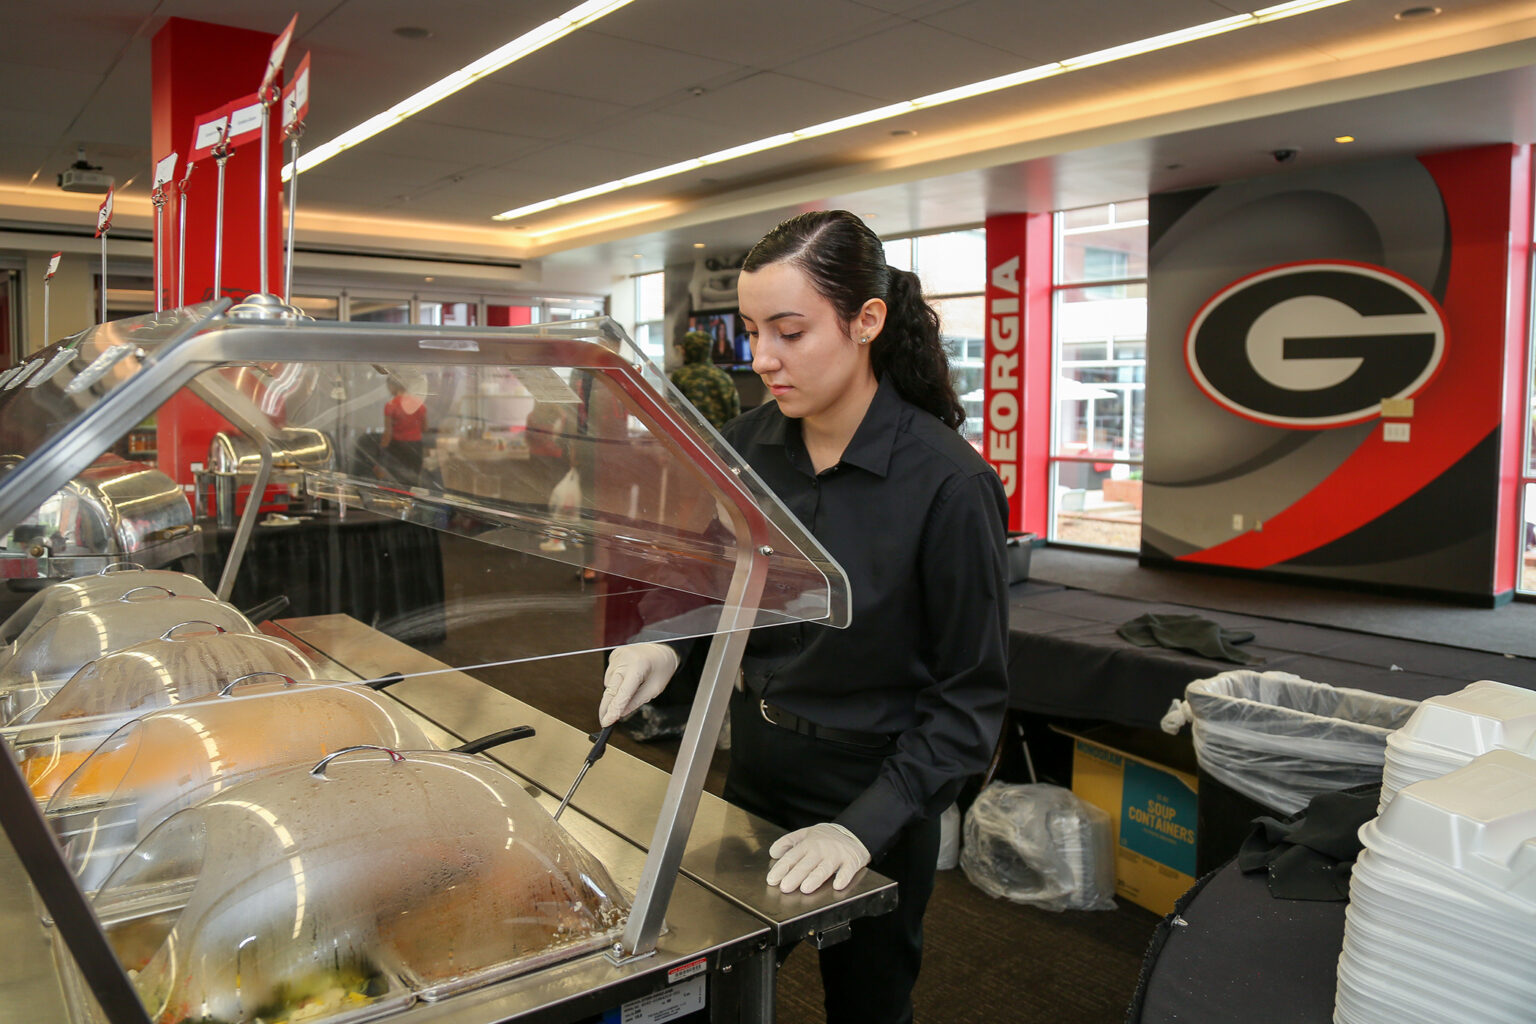 Maya Dubos, a third-year hospitality and food industry management major, works in Dogwood Hall inside the Georgia Center where she spends her internship serving student-athletes. (Shannah Montgomery)